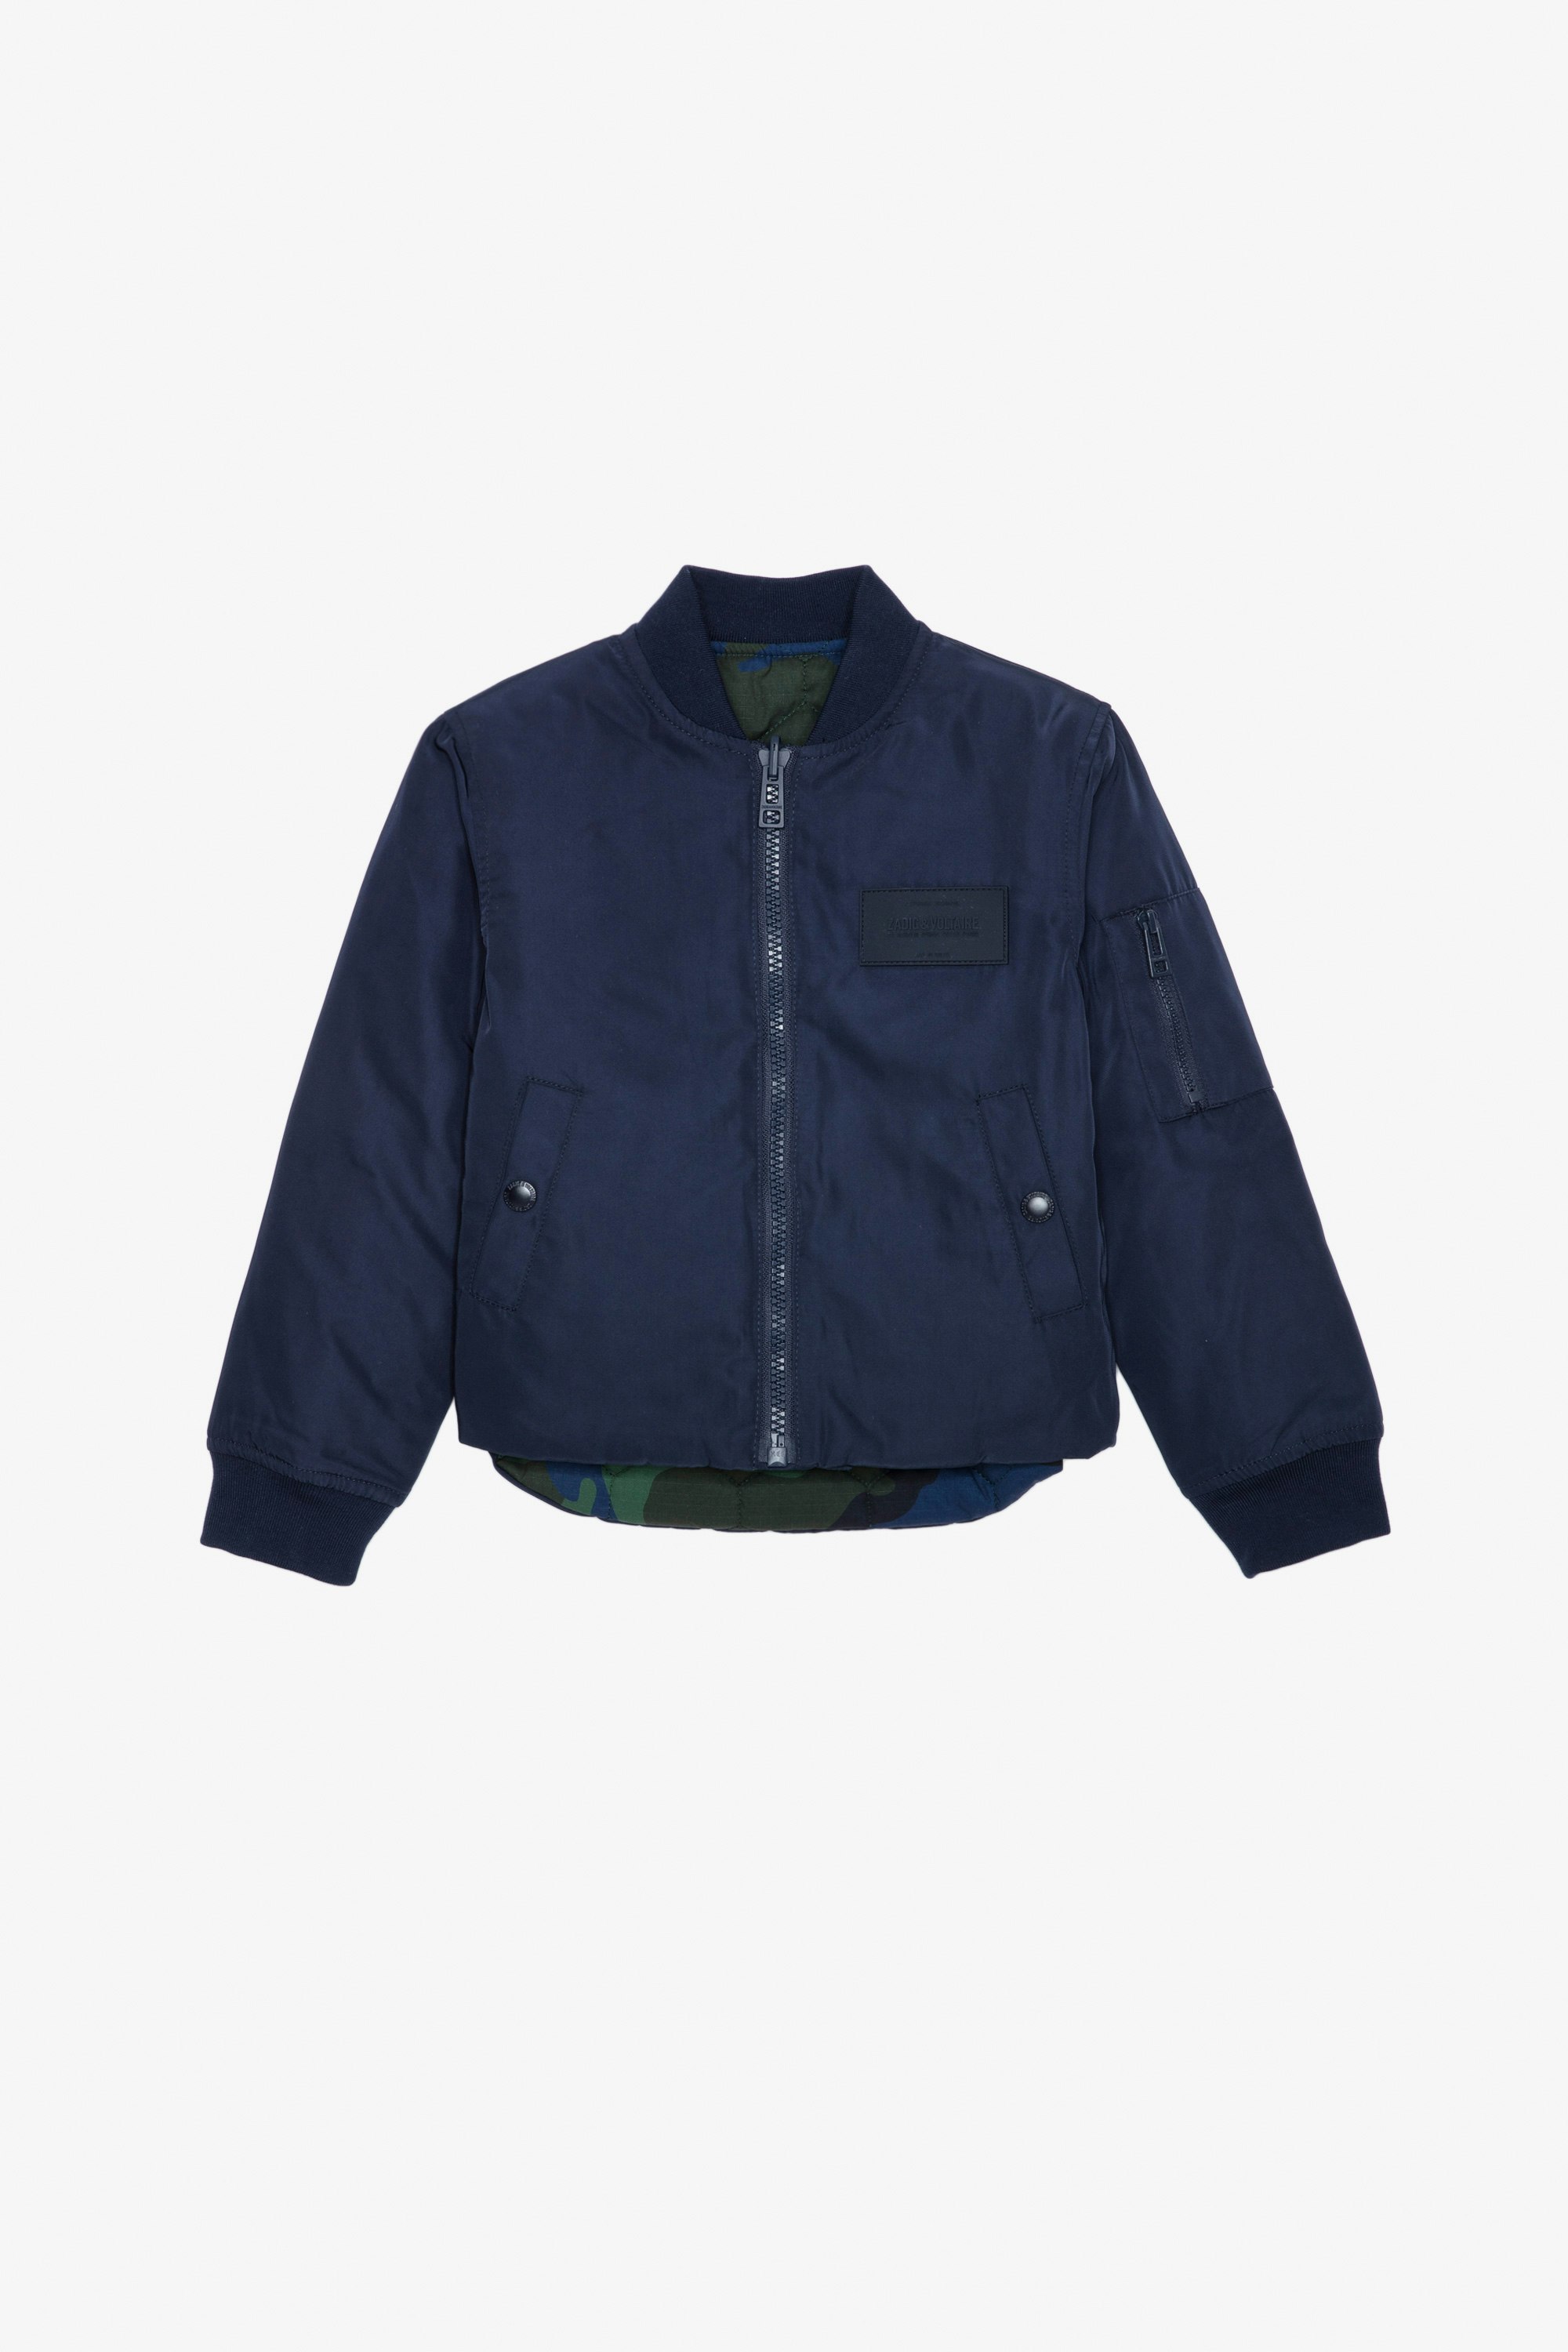 Charlie Boys’ Jacket - Boys’ plain navy blue reversible jacket with camouflage print and ZV embroidery.